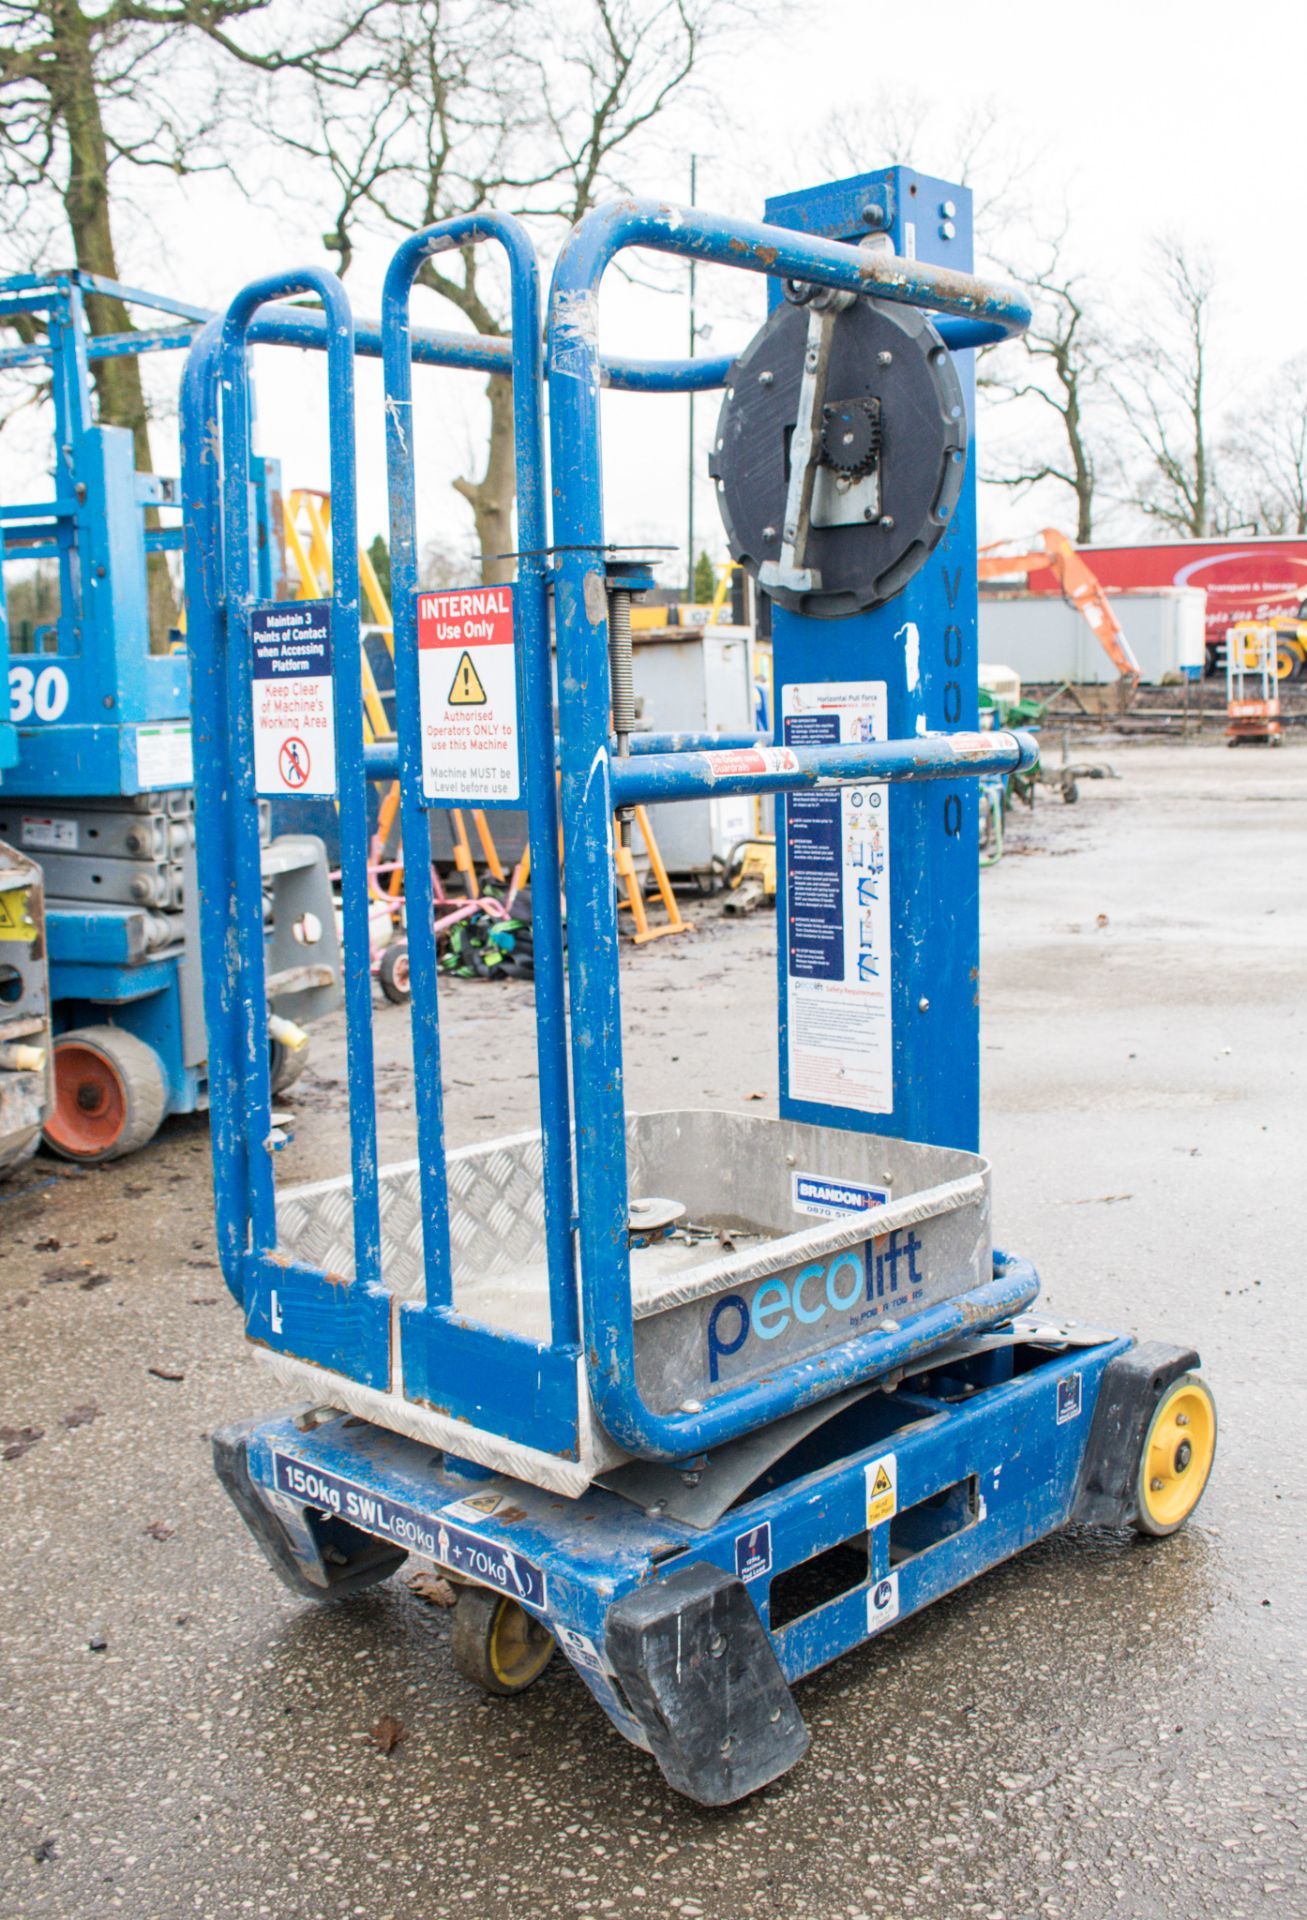 Power Tower Peco Lift manual personnel lift 08PV0030